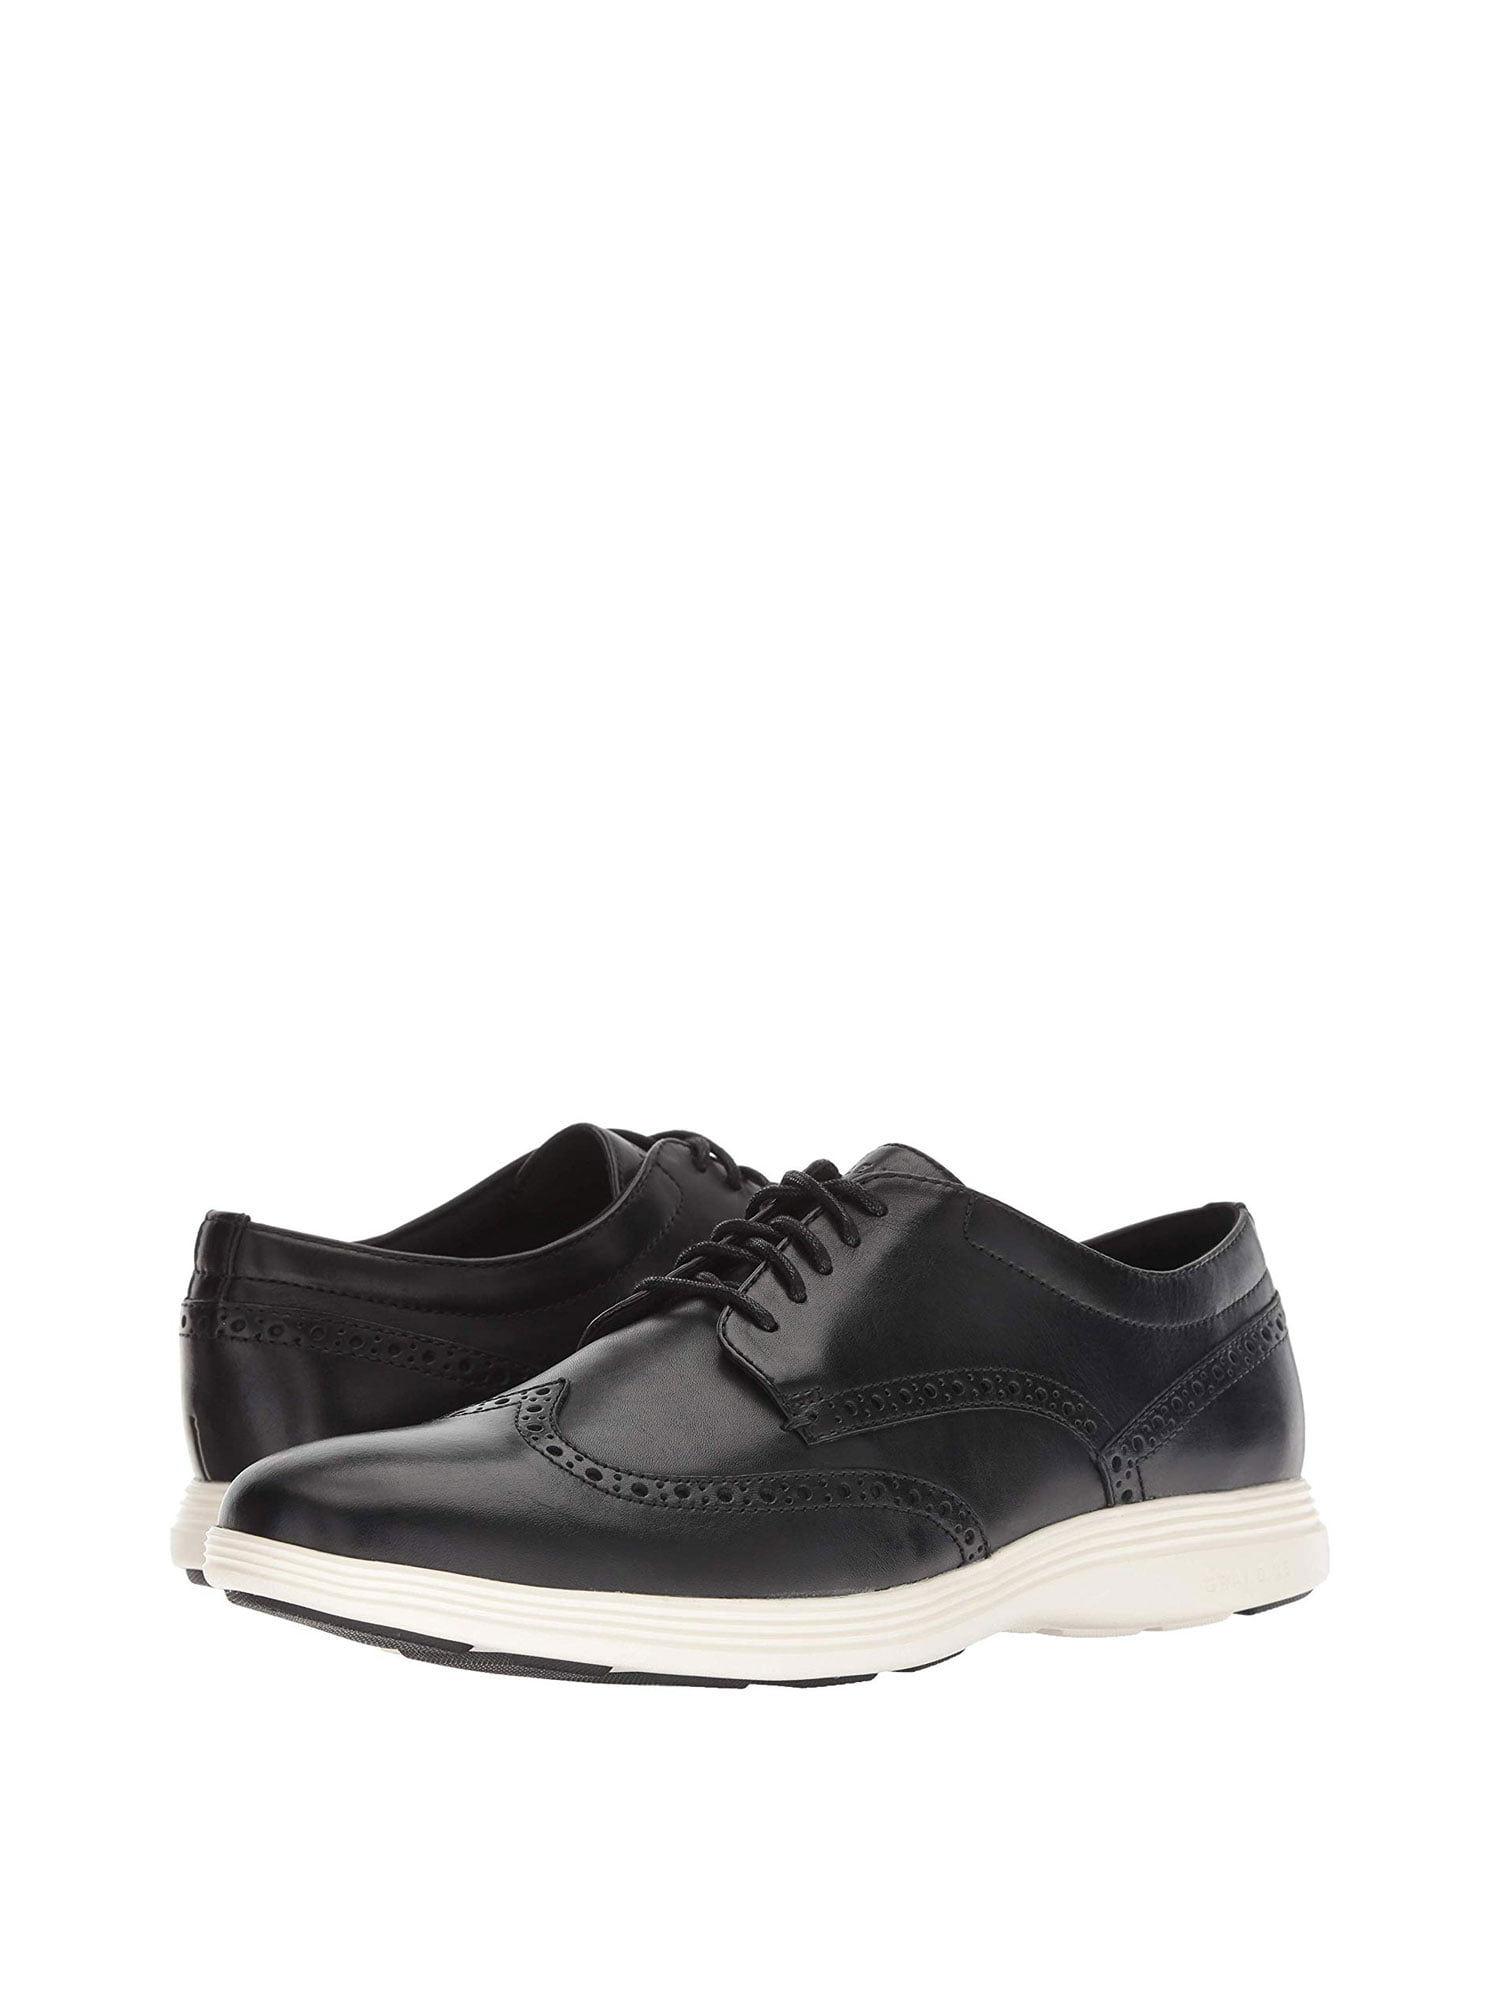 cole haan men's grand tour wing ox oxford